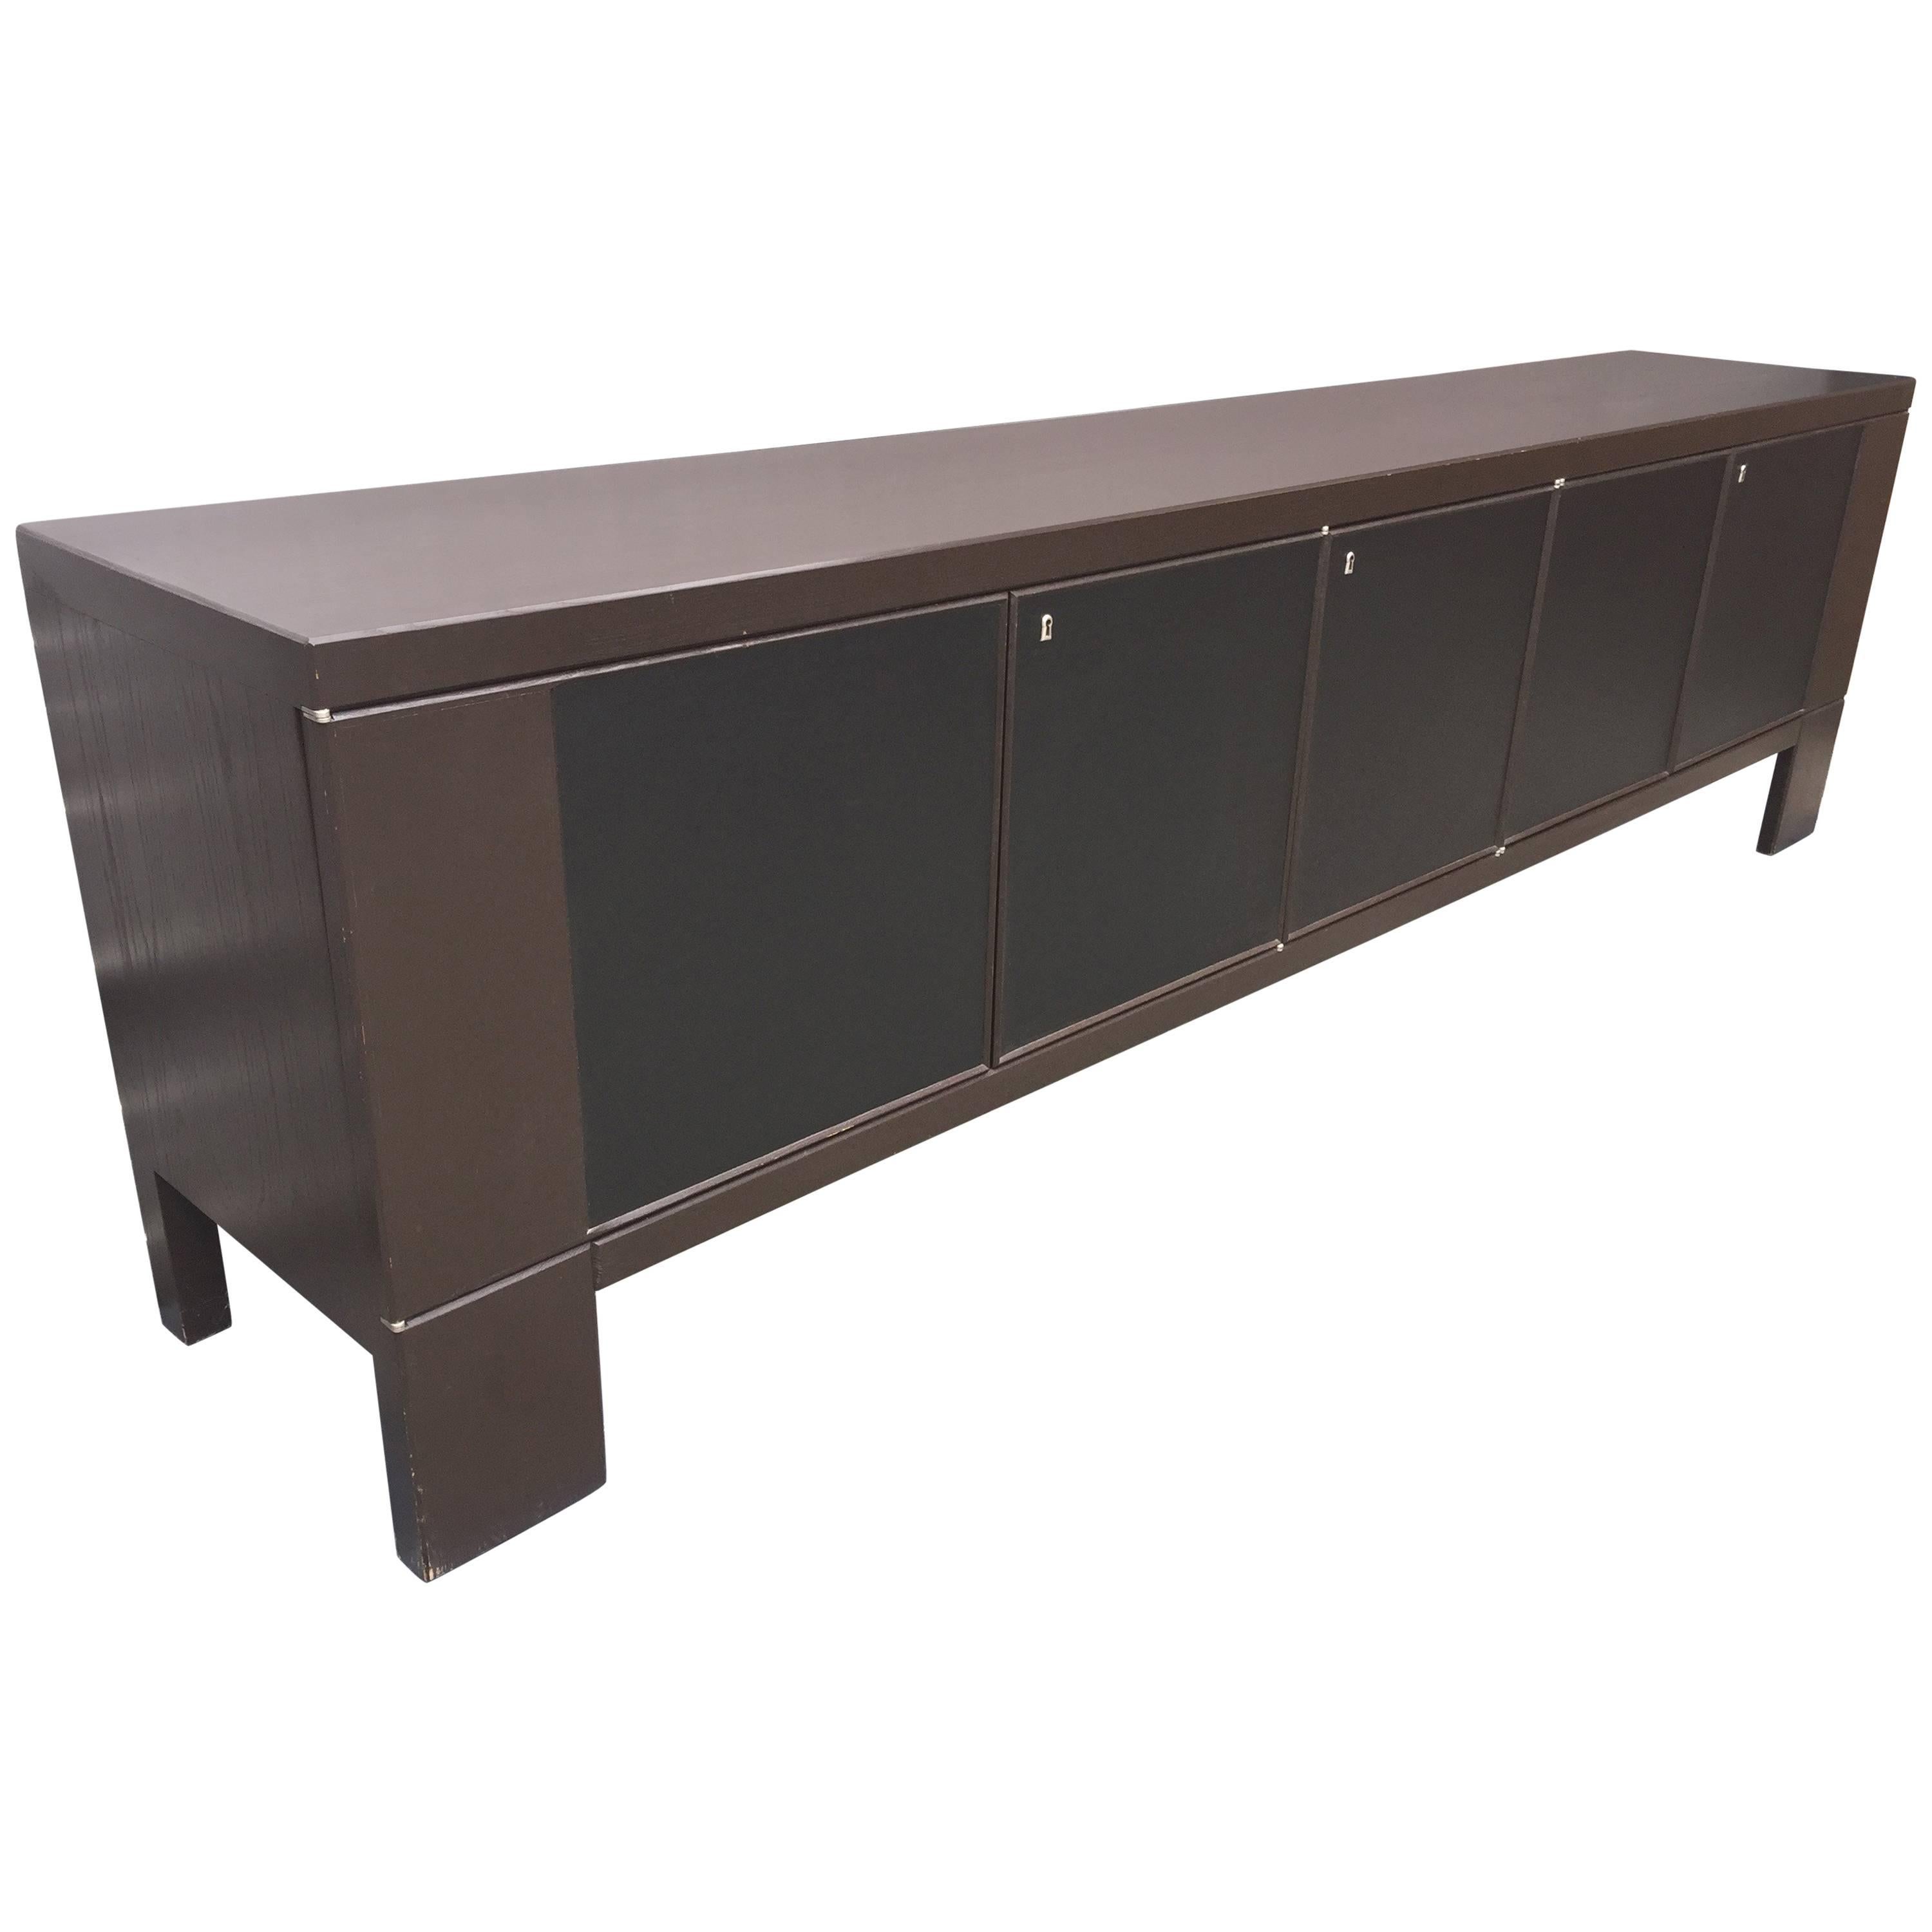 Large Brutalist Sideboard in Black and Brown Lacquered Oak, circa 1970 For Sale